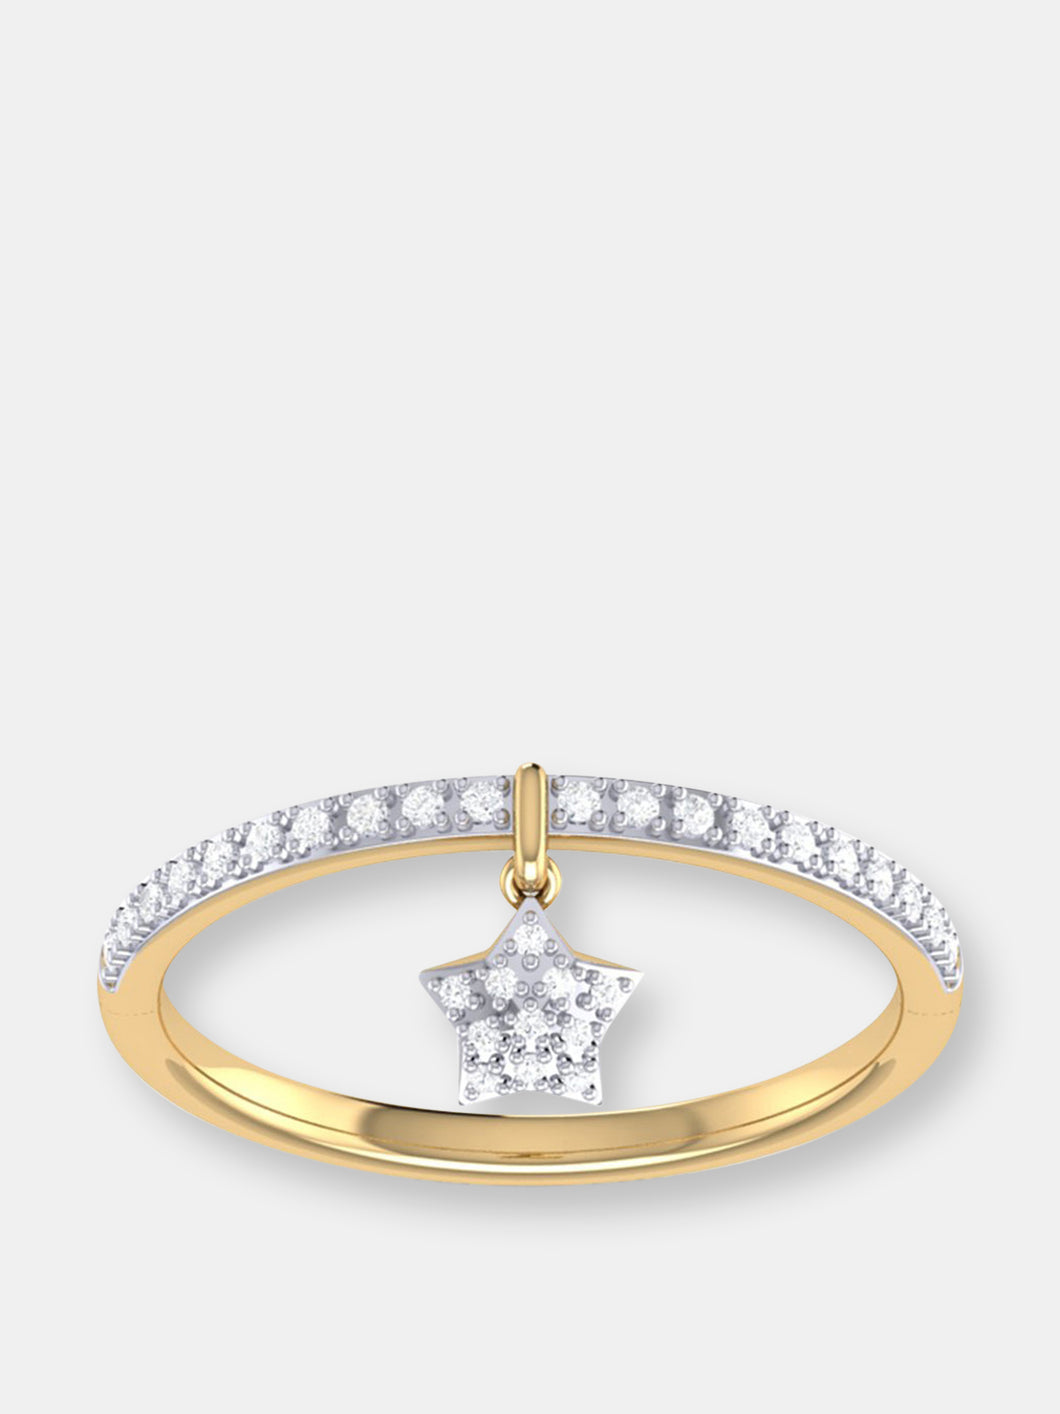 Starkissed Diamond Charm Ring in 14K Yellow Gold Vermeil on Sterling Silver